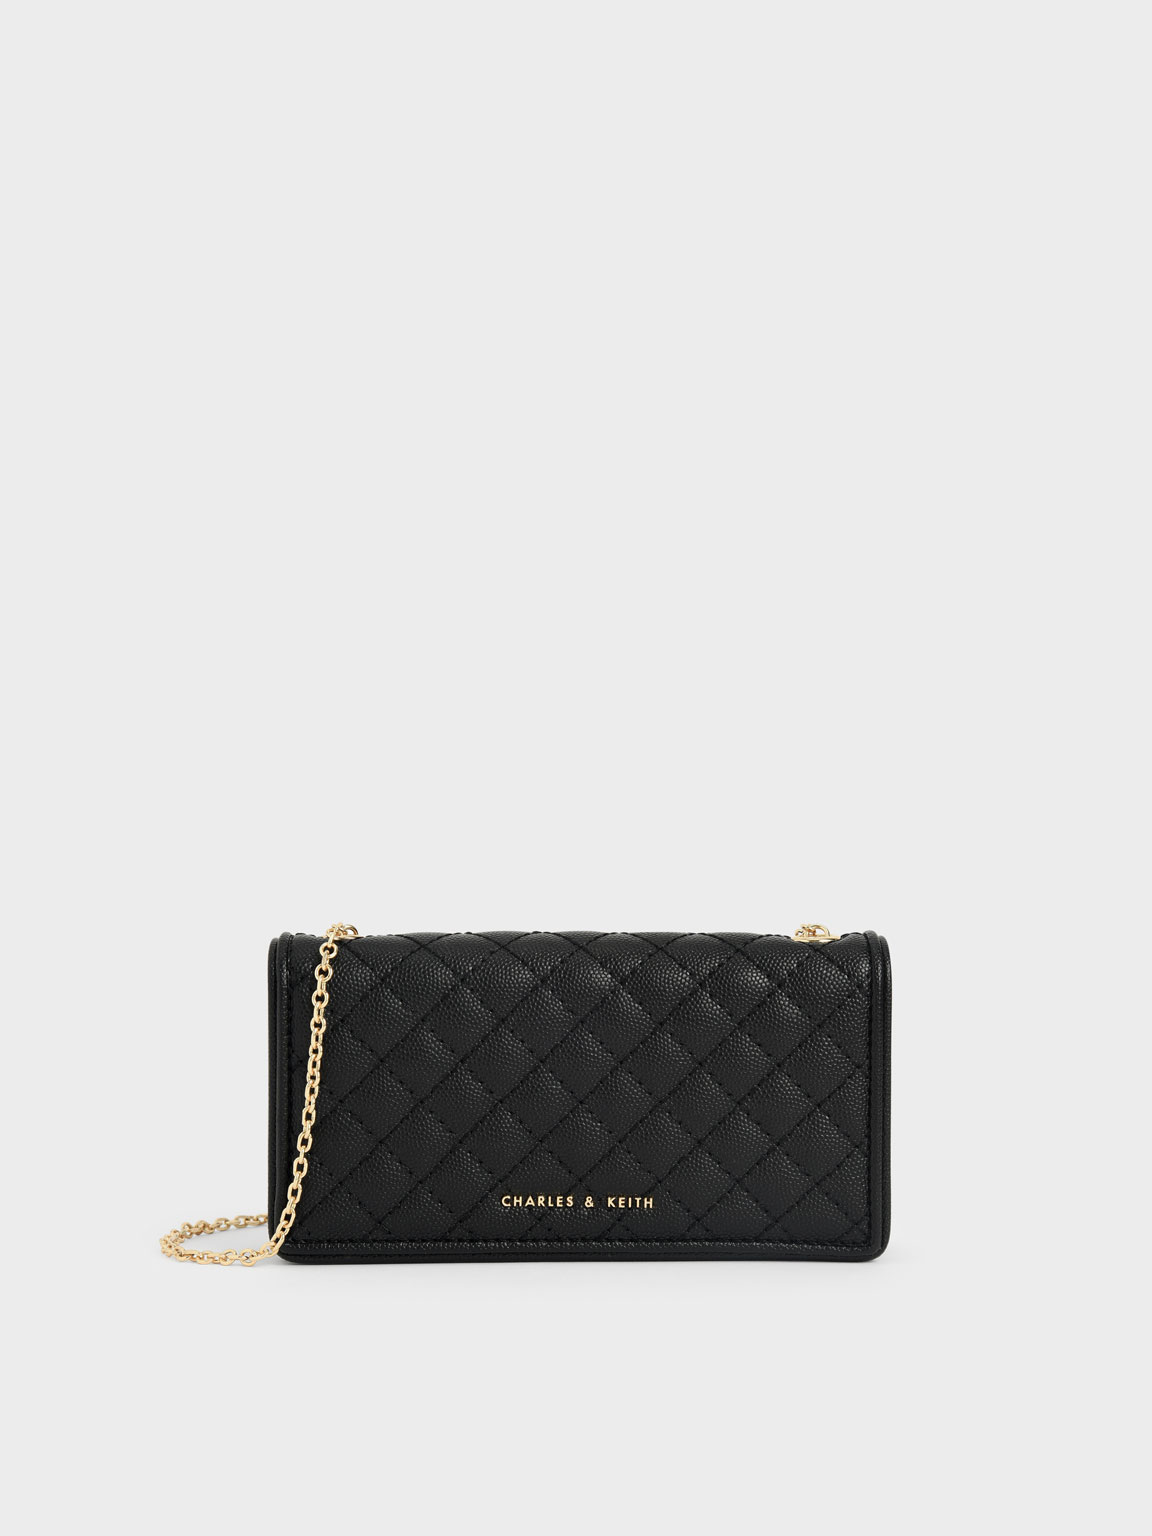 Square Gucci Mens Wallets, For Daily